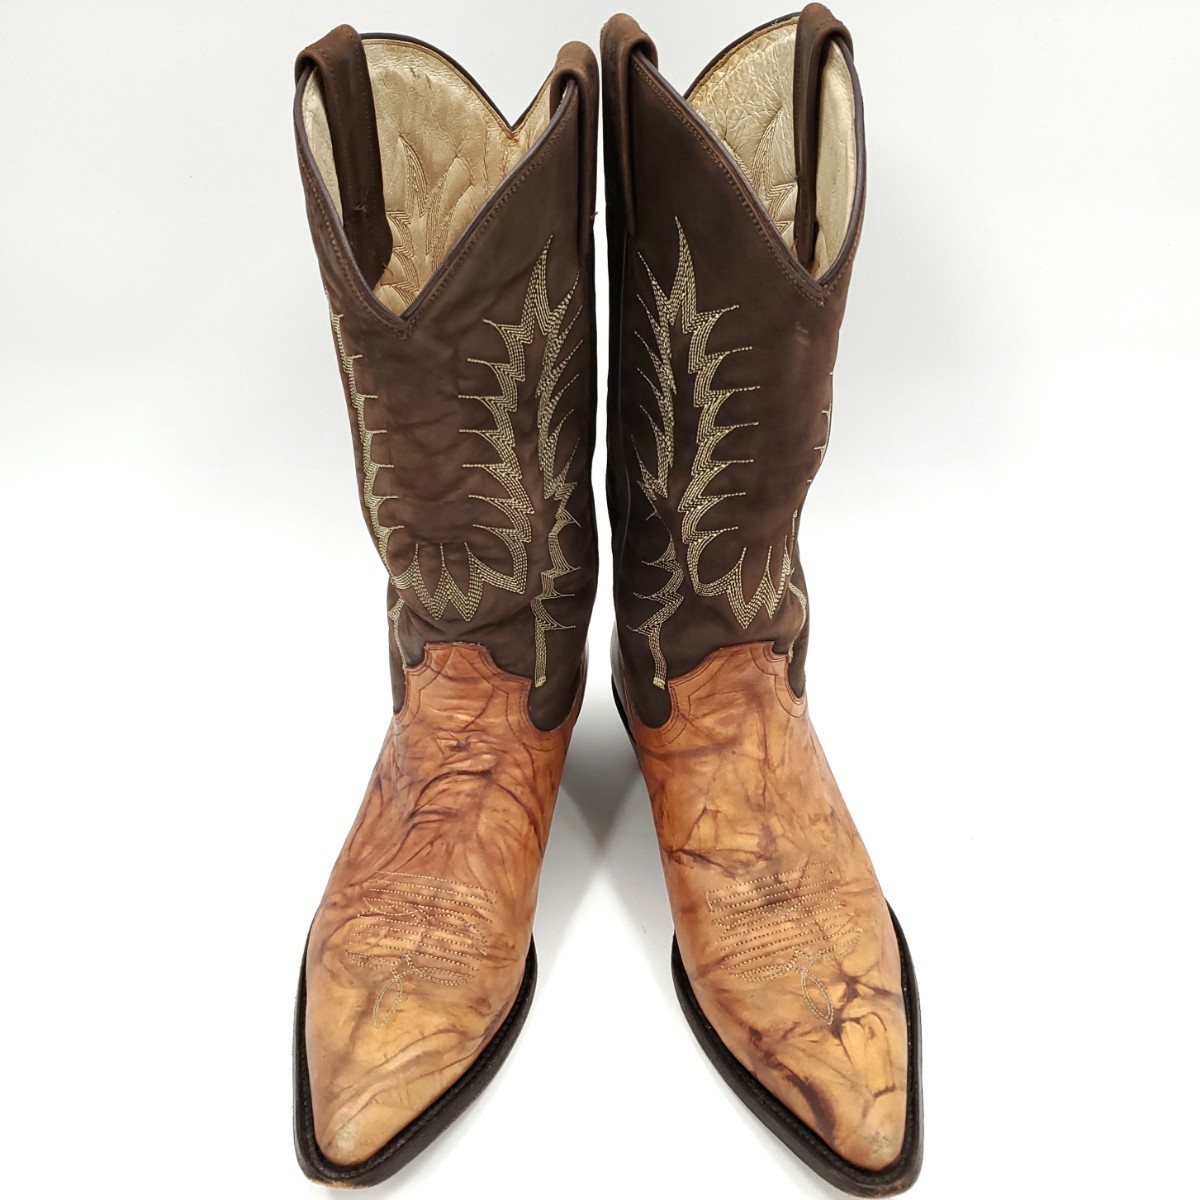  superior article Mexico made *Rancho* approximately 26.5cm leather western boots tea marble US8.5EE men's original leather Rancho real leather long kau Boy lai DIN gSZS62